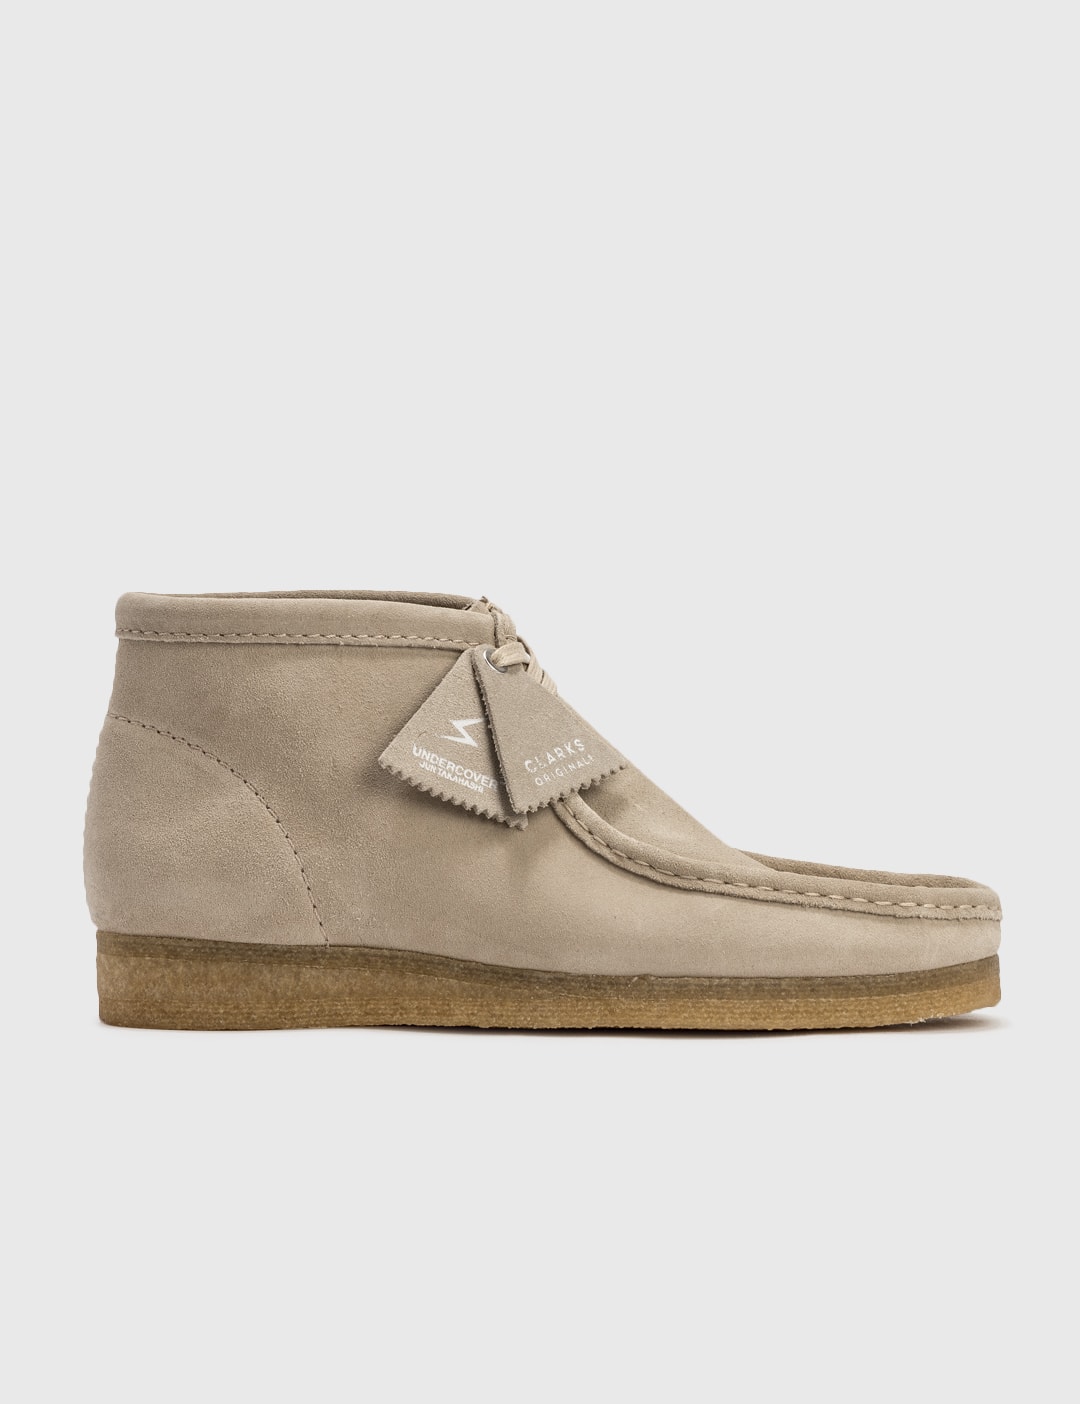 Undercover - Undercover x Clarks Wallabee | HBX - Globally Fashion and Hypebeast